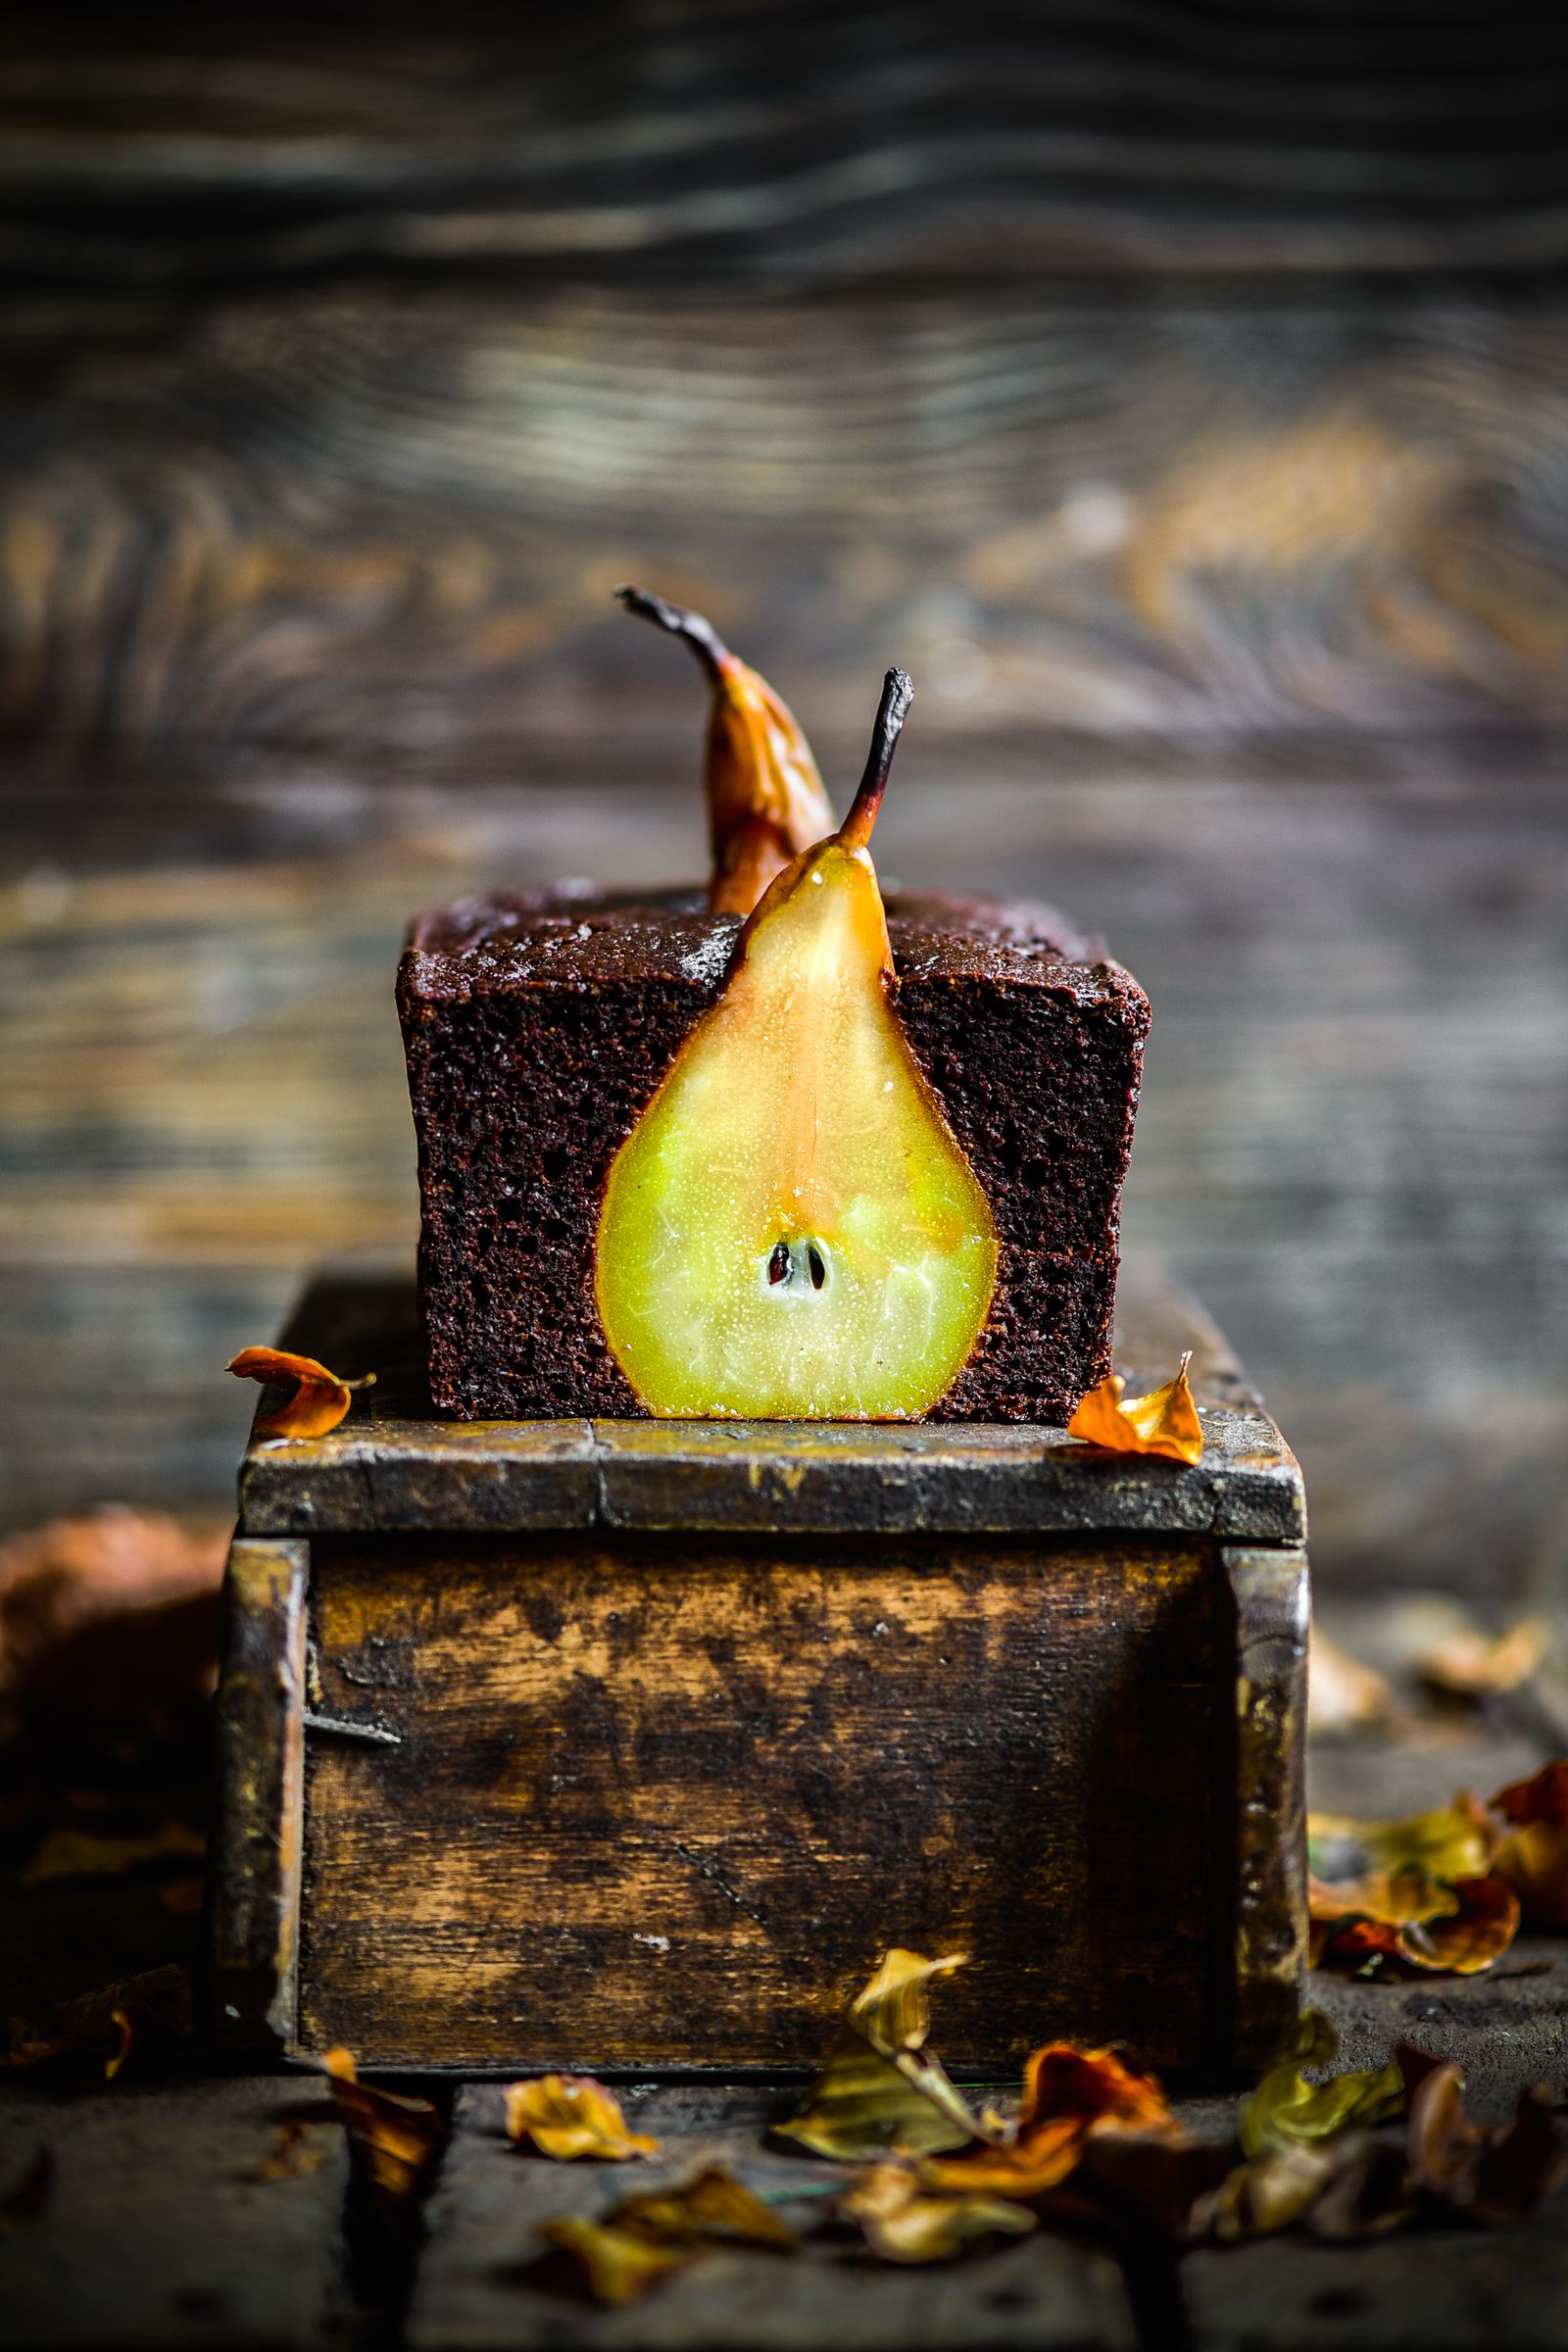 Pear and Chocolate Loaf